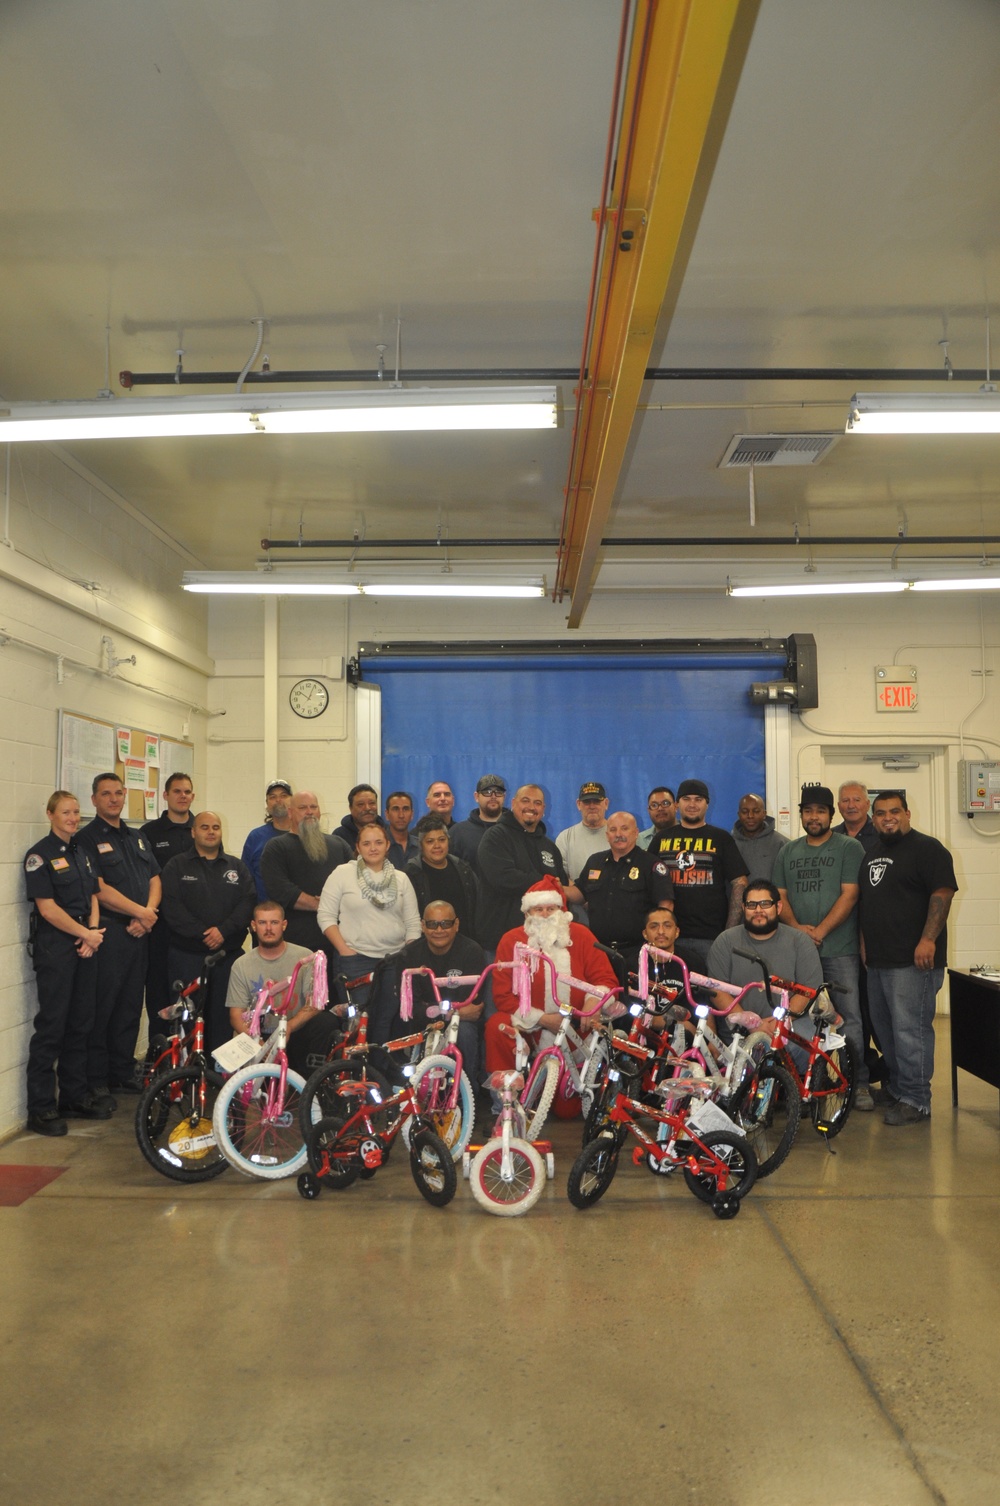 Production Plant Barstow donates bikes for Toys for Tots